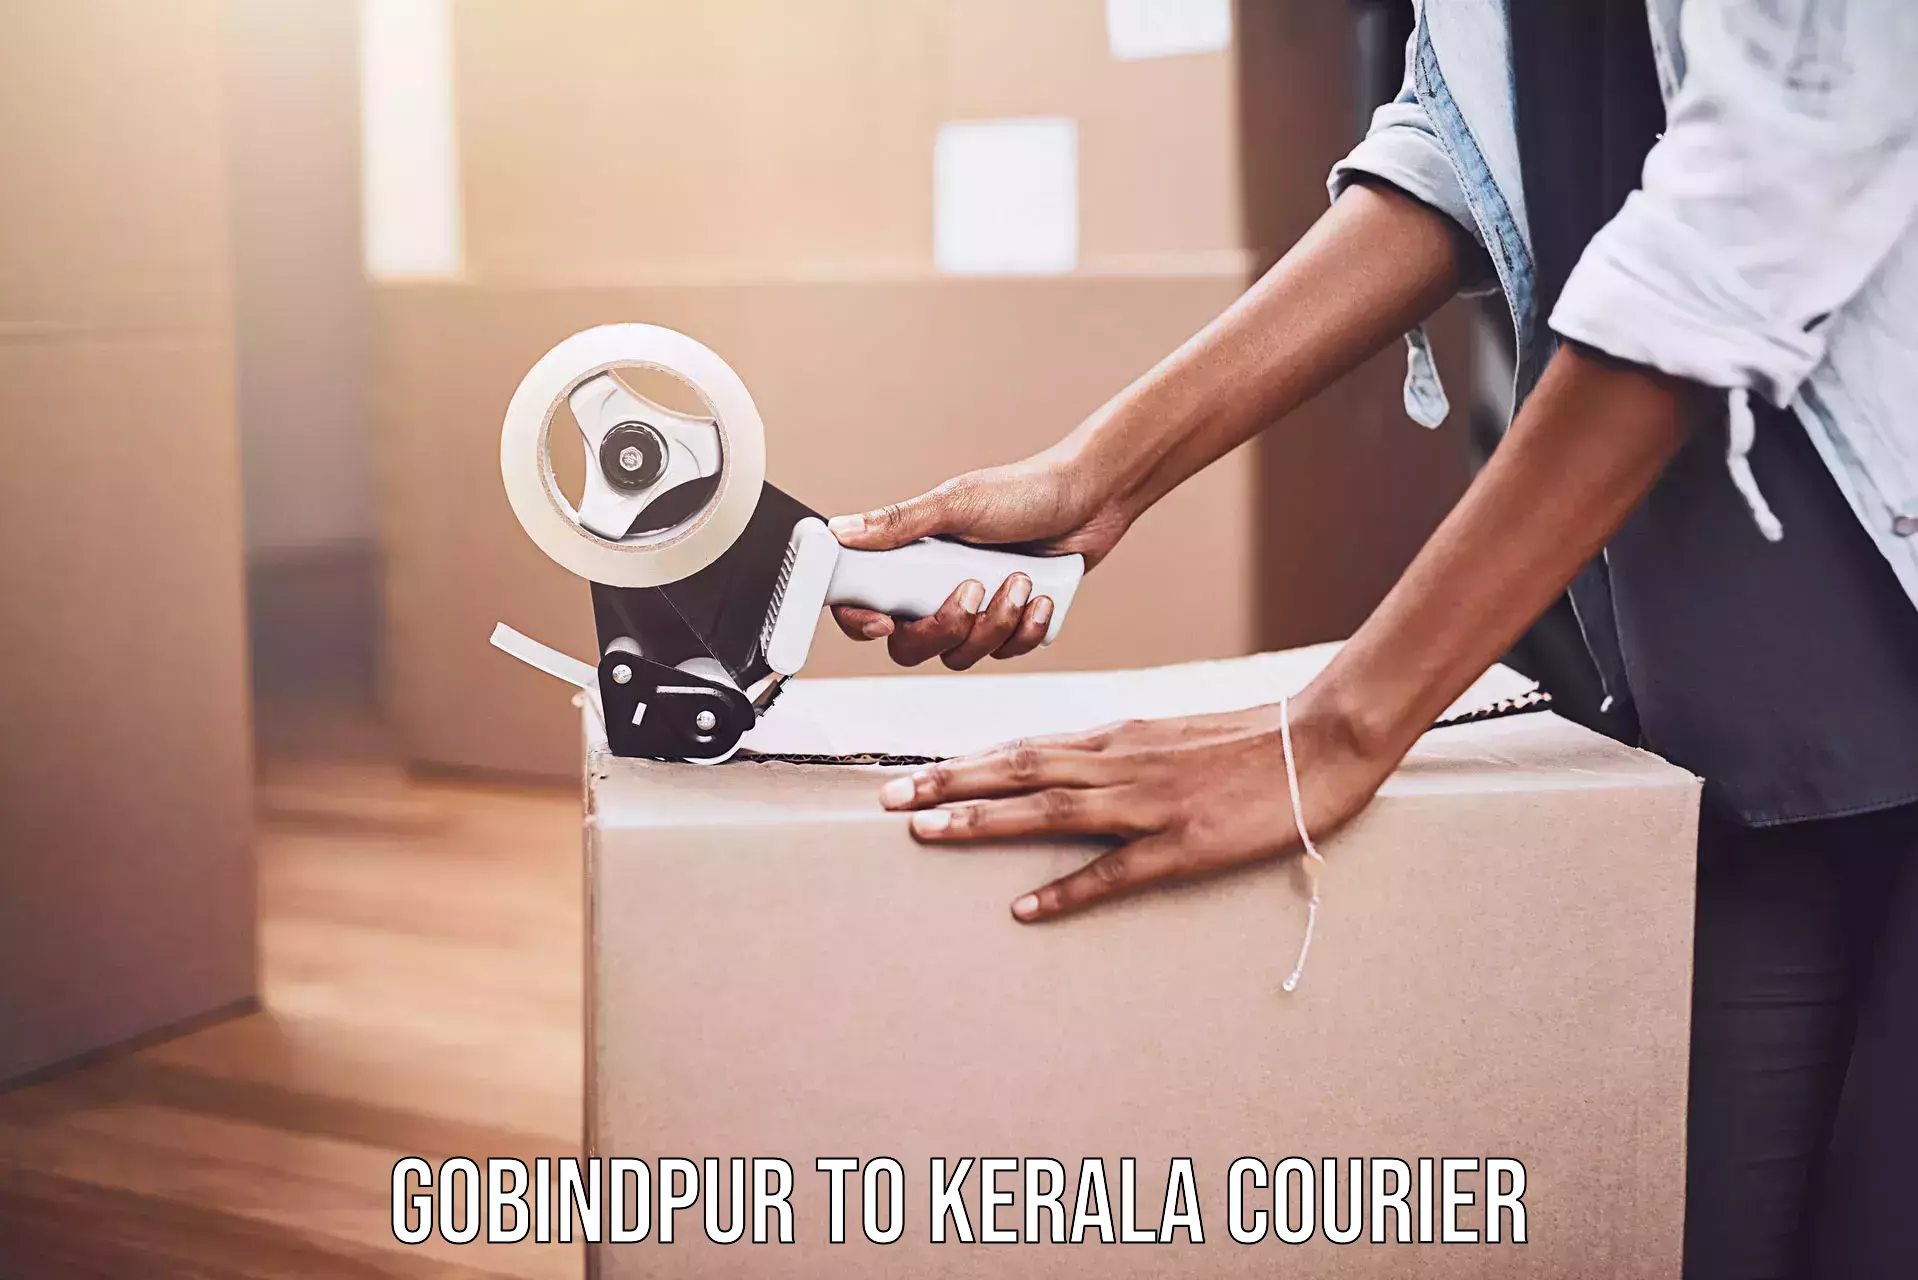 State-of-the-art courier technology Gobindpur to Nallepilly